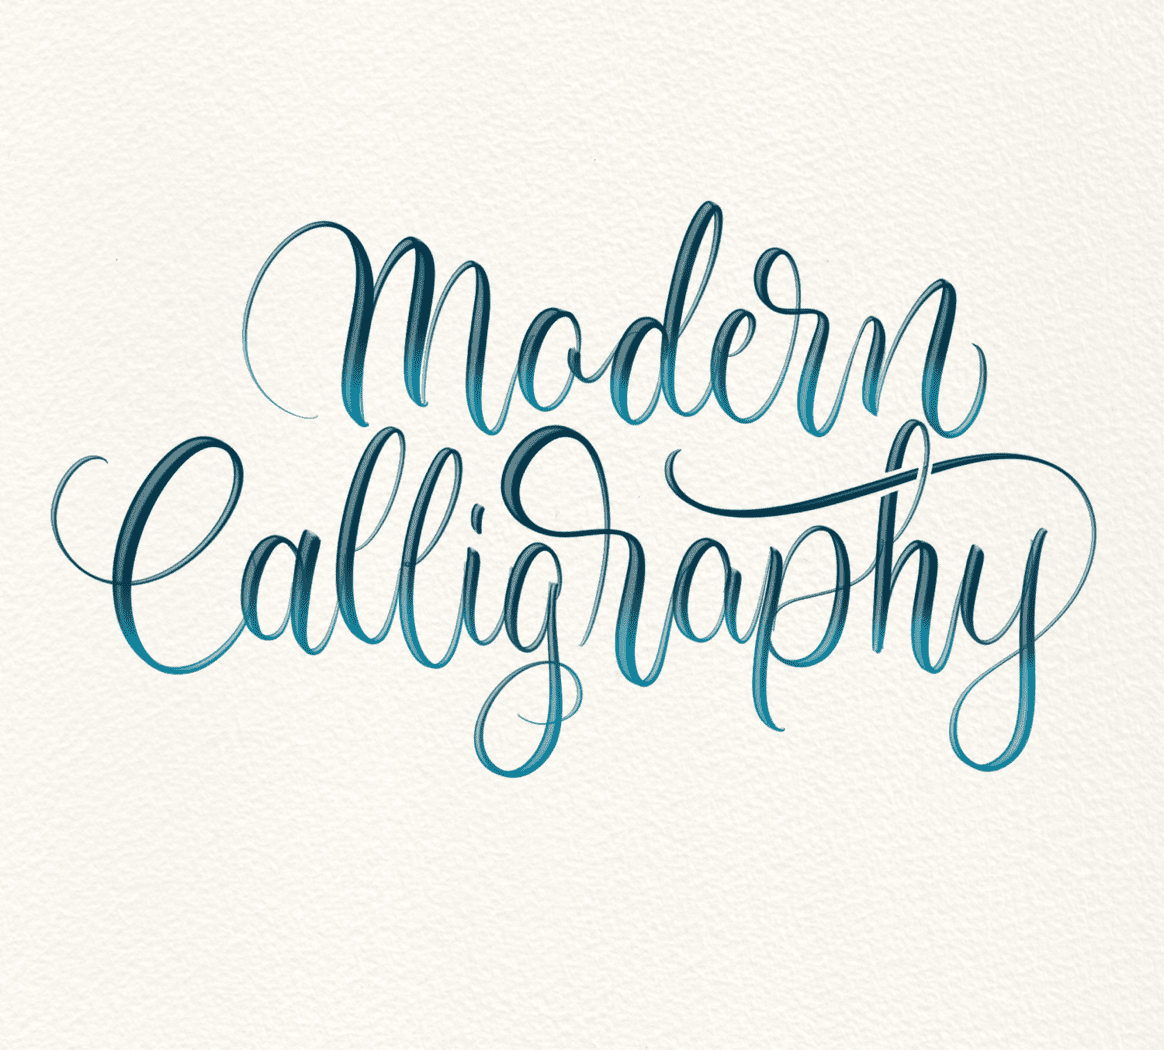 The Ultimate DIY Modern Calligraphy Starter Kit  Learn modern calligraphy,  Modern calligraphy, Learn calligraphy